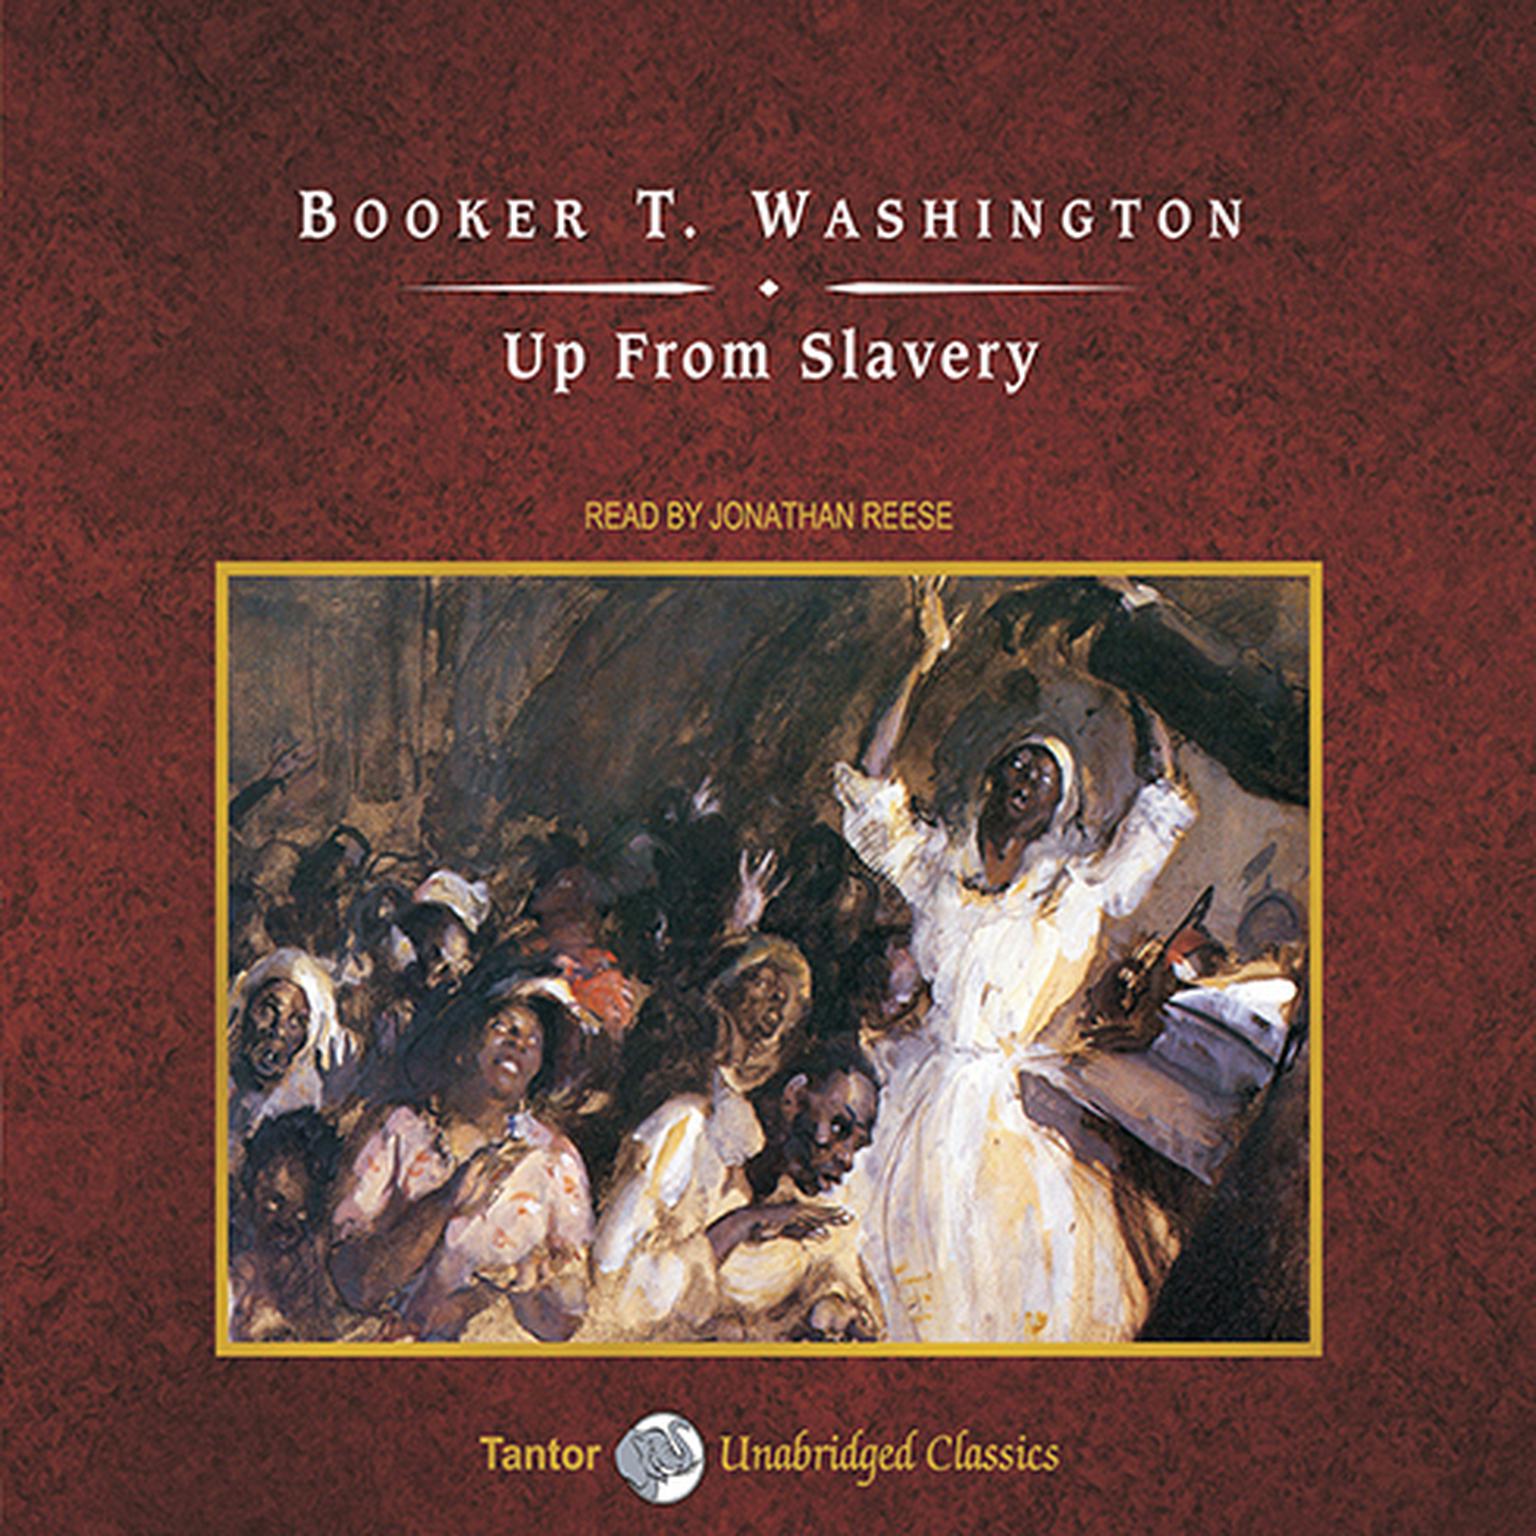 Up From Slavery, with eBook Audiobook, by Booker T. Washington